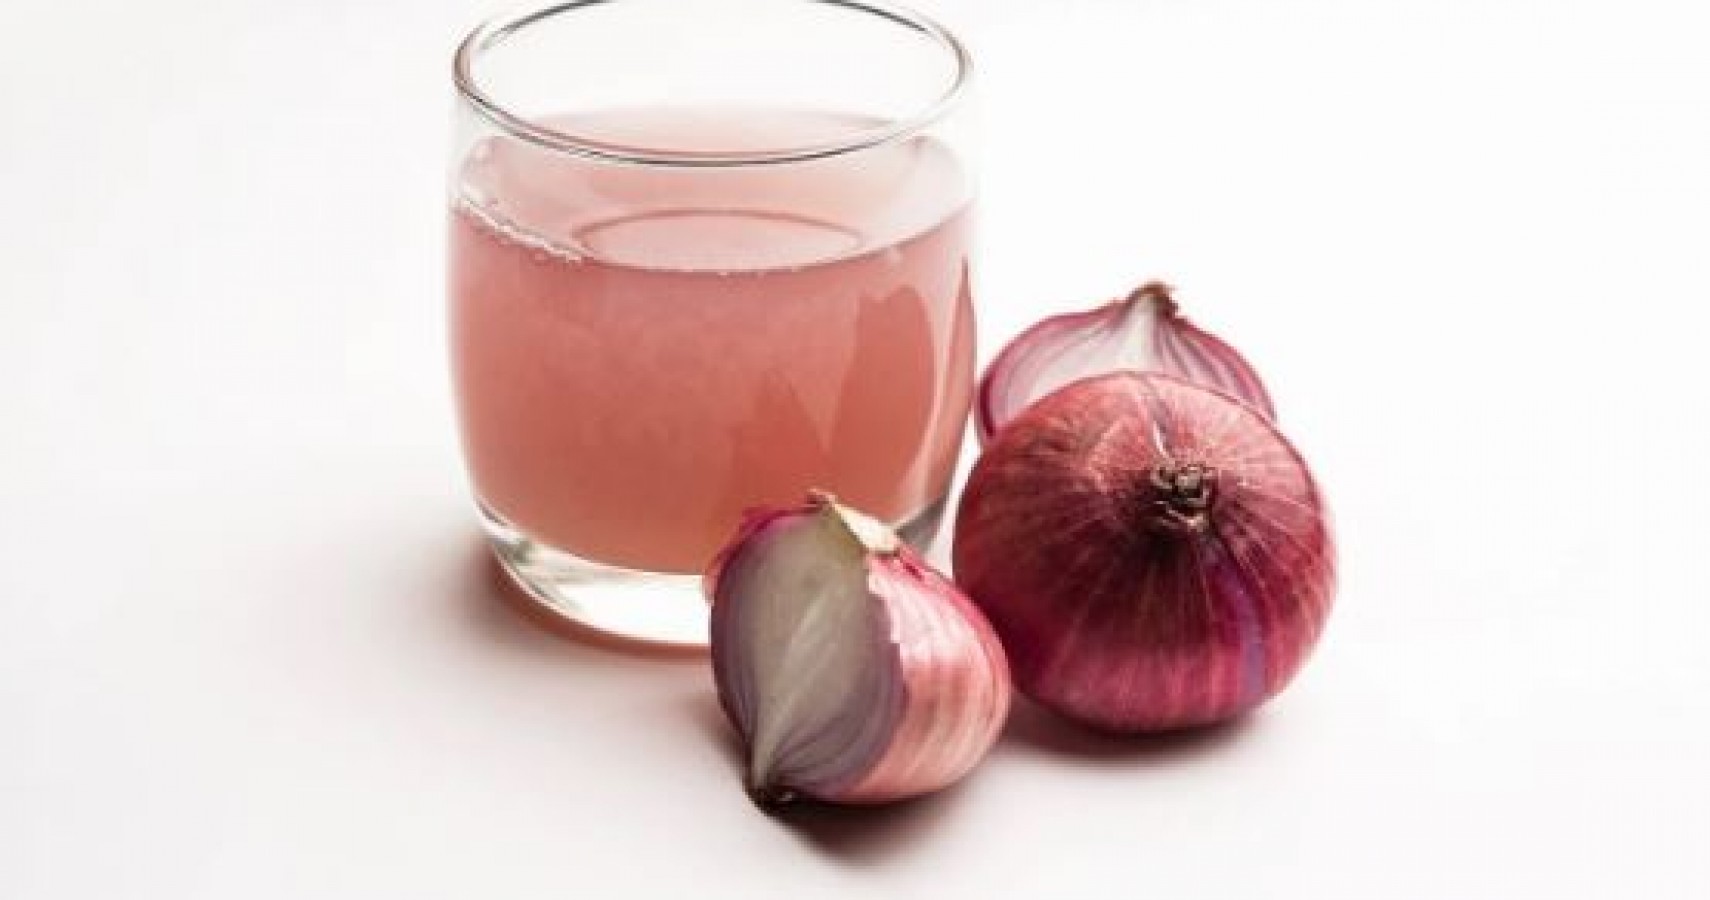 Onion syrup can protect from hair fall to wrinkles, know benefits of  drinking | NewsTrack English 1